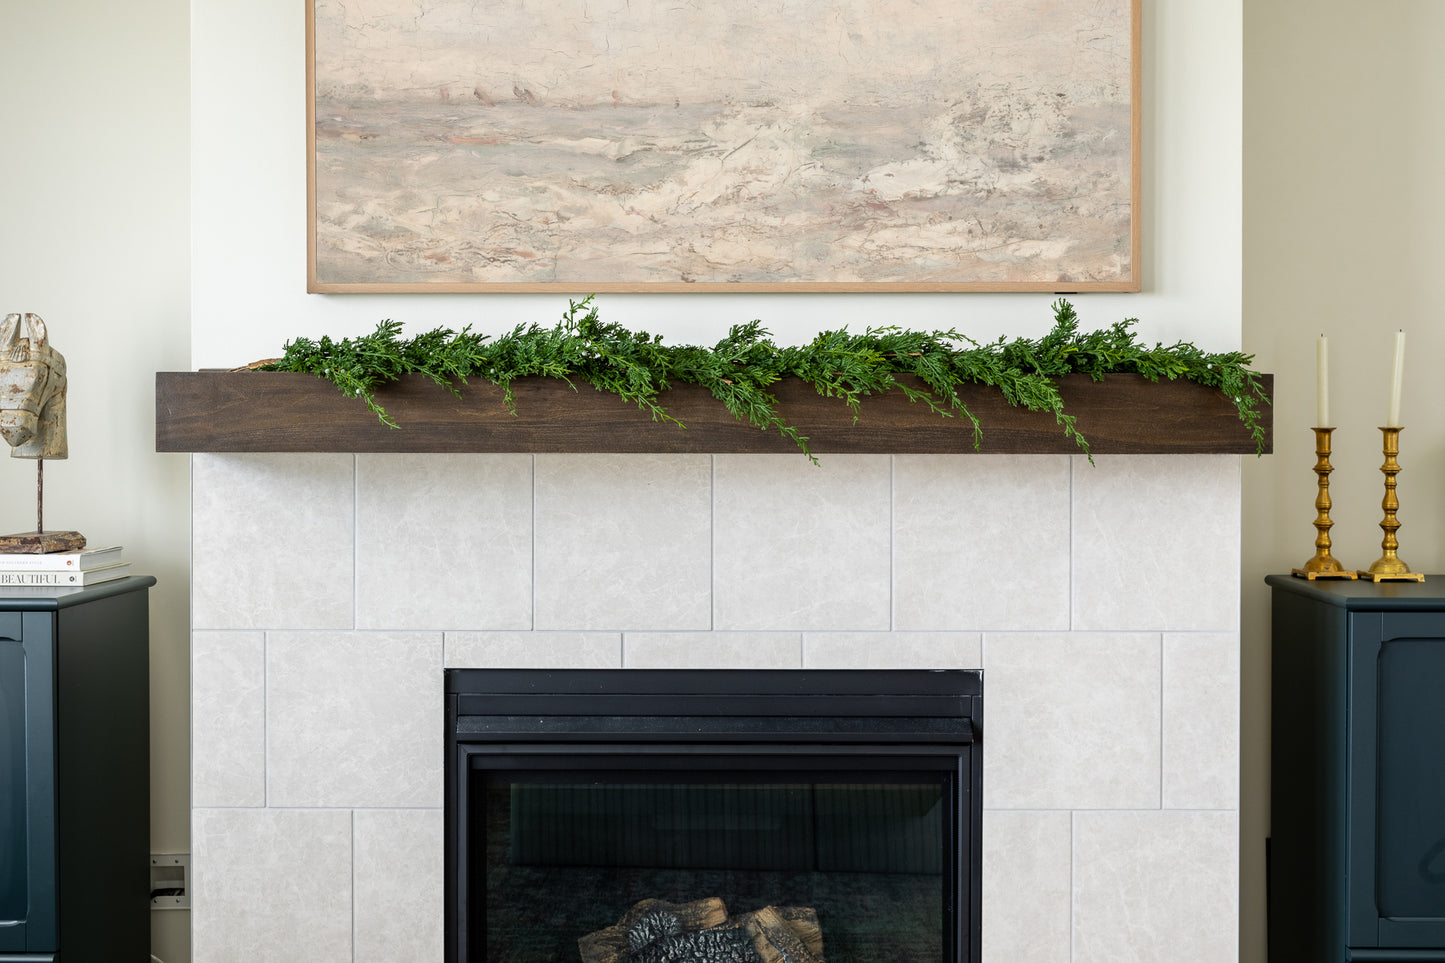 Winter berry Christmas garland draped across mantle with mixed greenery featuring white blue juniper berries.